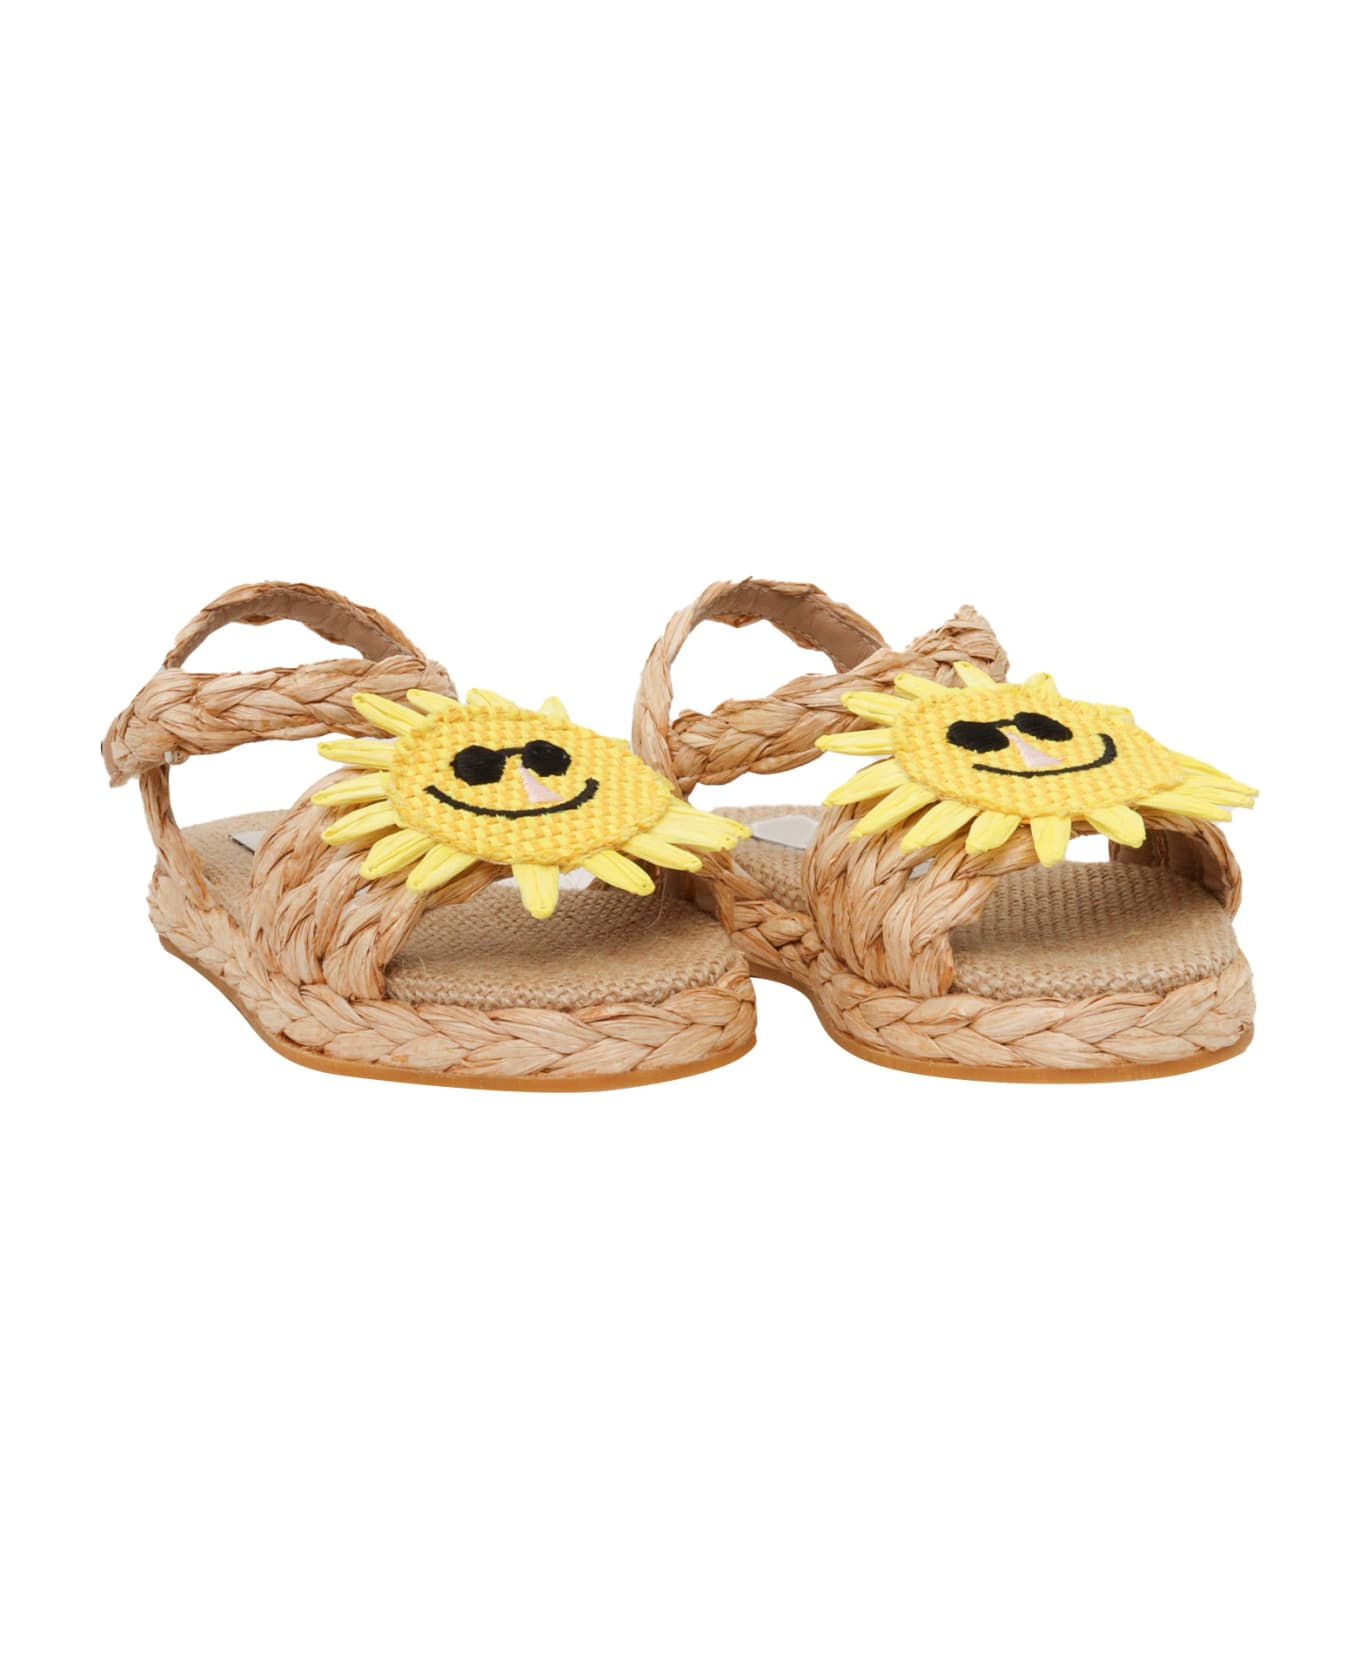 Stella McCartney Bown Sandals With Sun - BROWN